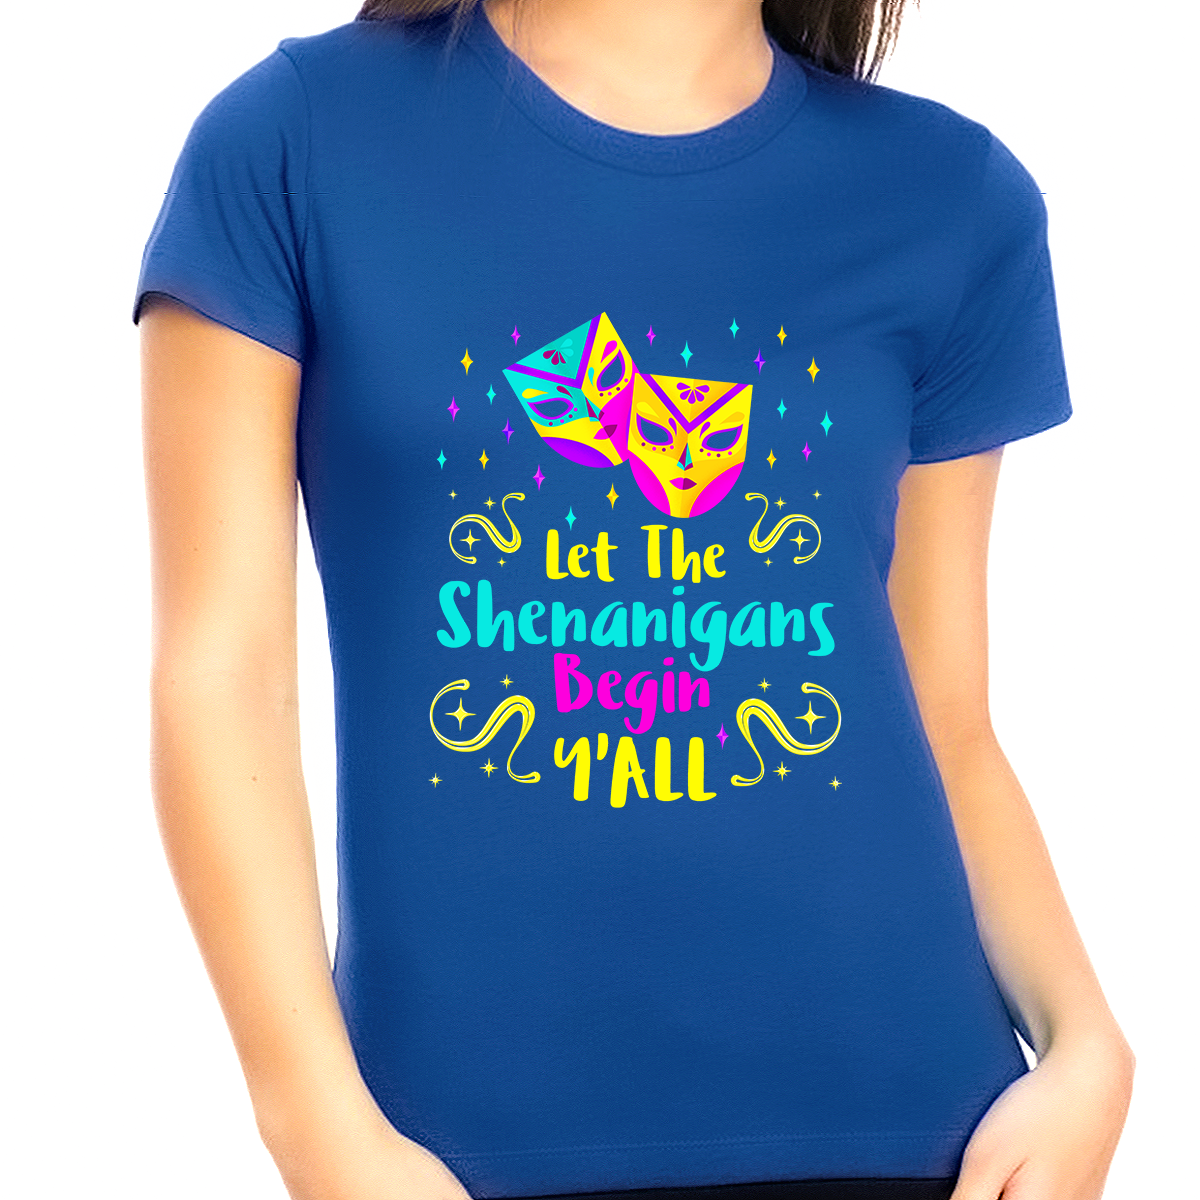 Funny Plus Size Mardi Gras Shirts for Women Let The Shenanigans Begin Yall Plus Size Mardi Gras Outfit